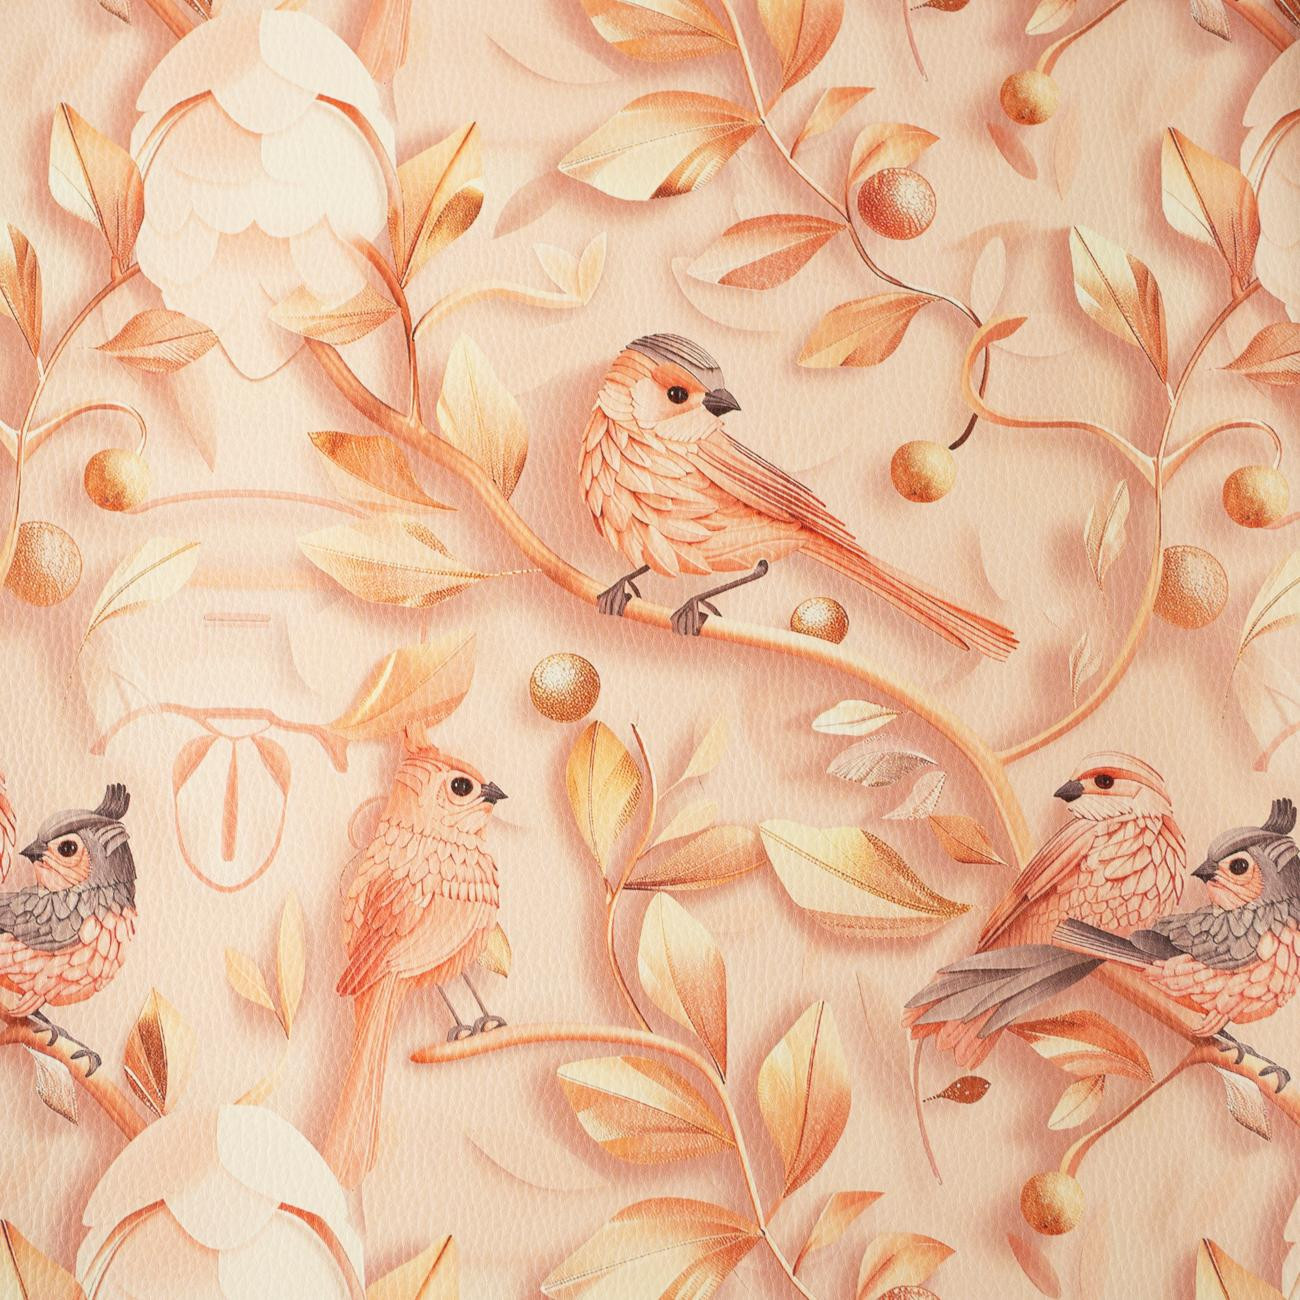 PINK BIRDS - thick pressed leatherette